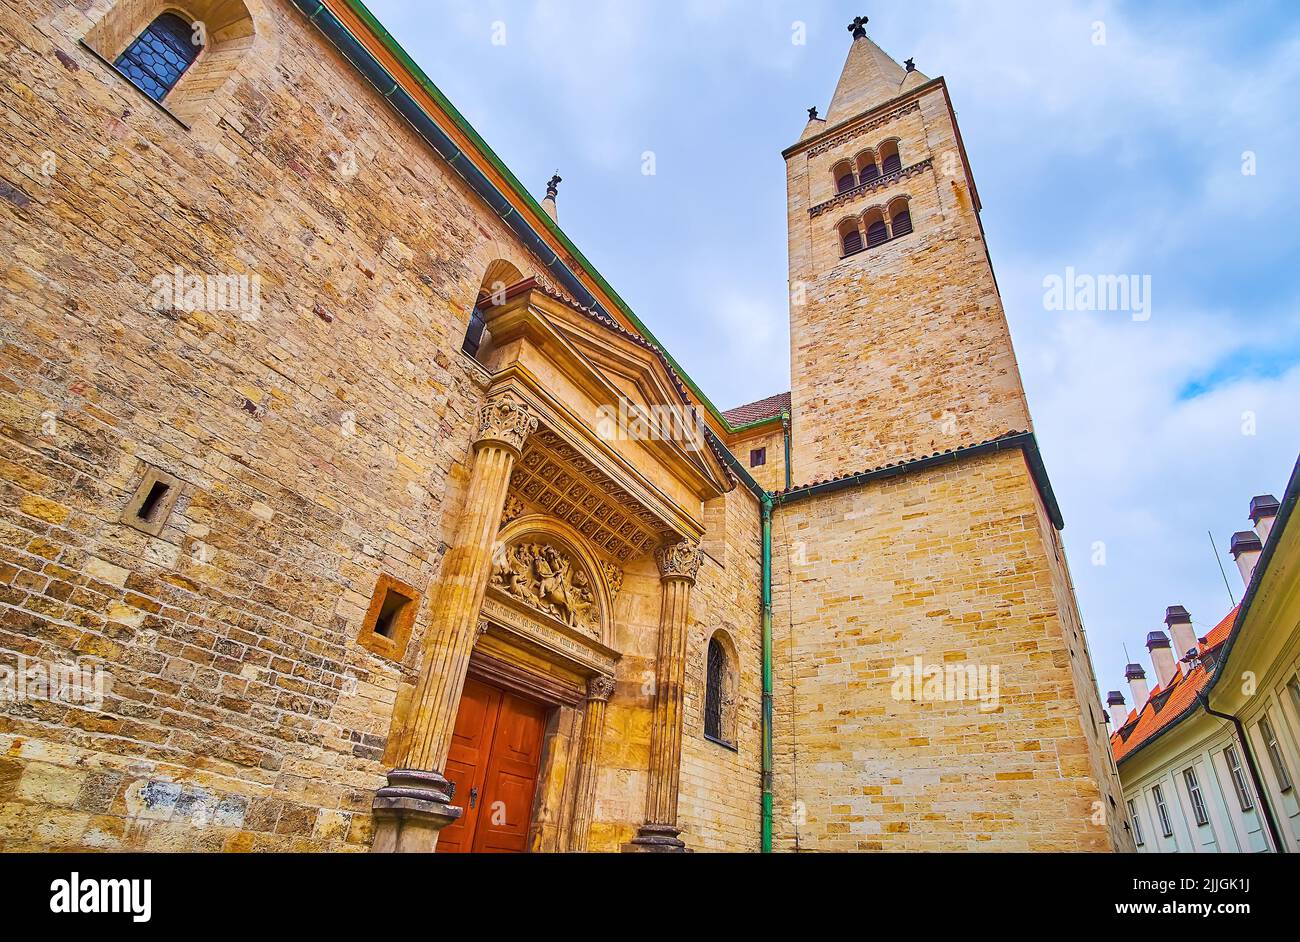 The side stone wall and bell tower of St George basilica, Jirska (St George) Street, Hradcany, Prague, Czech Republic Stock Photo